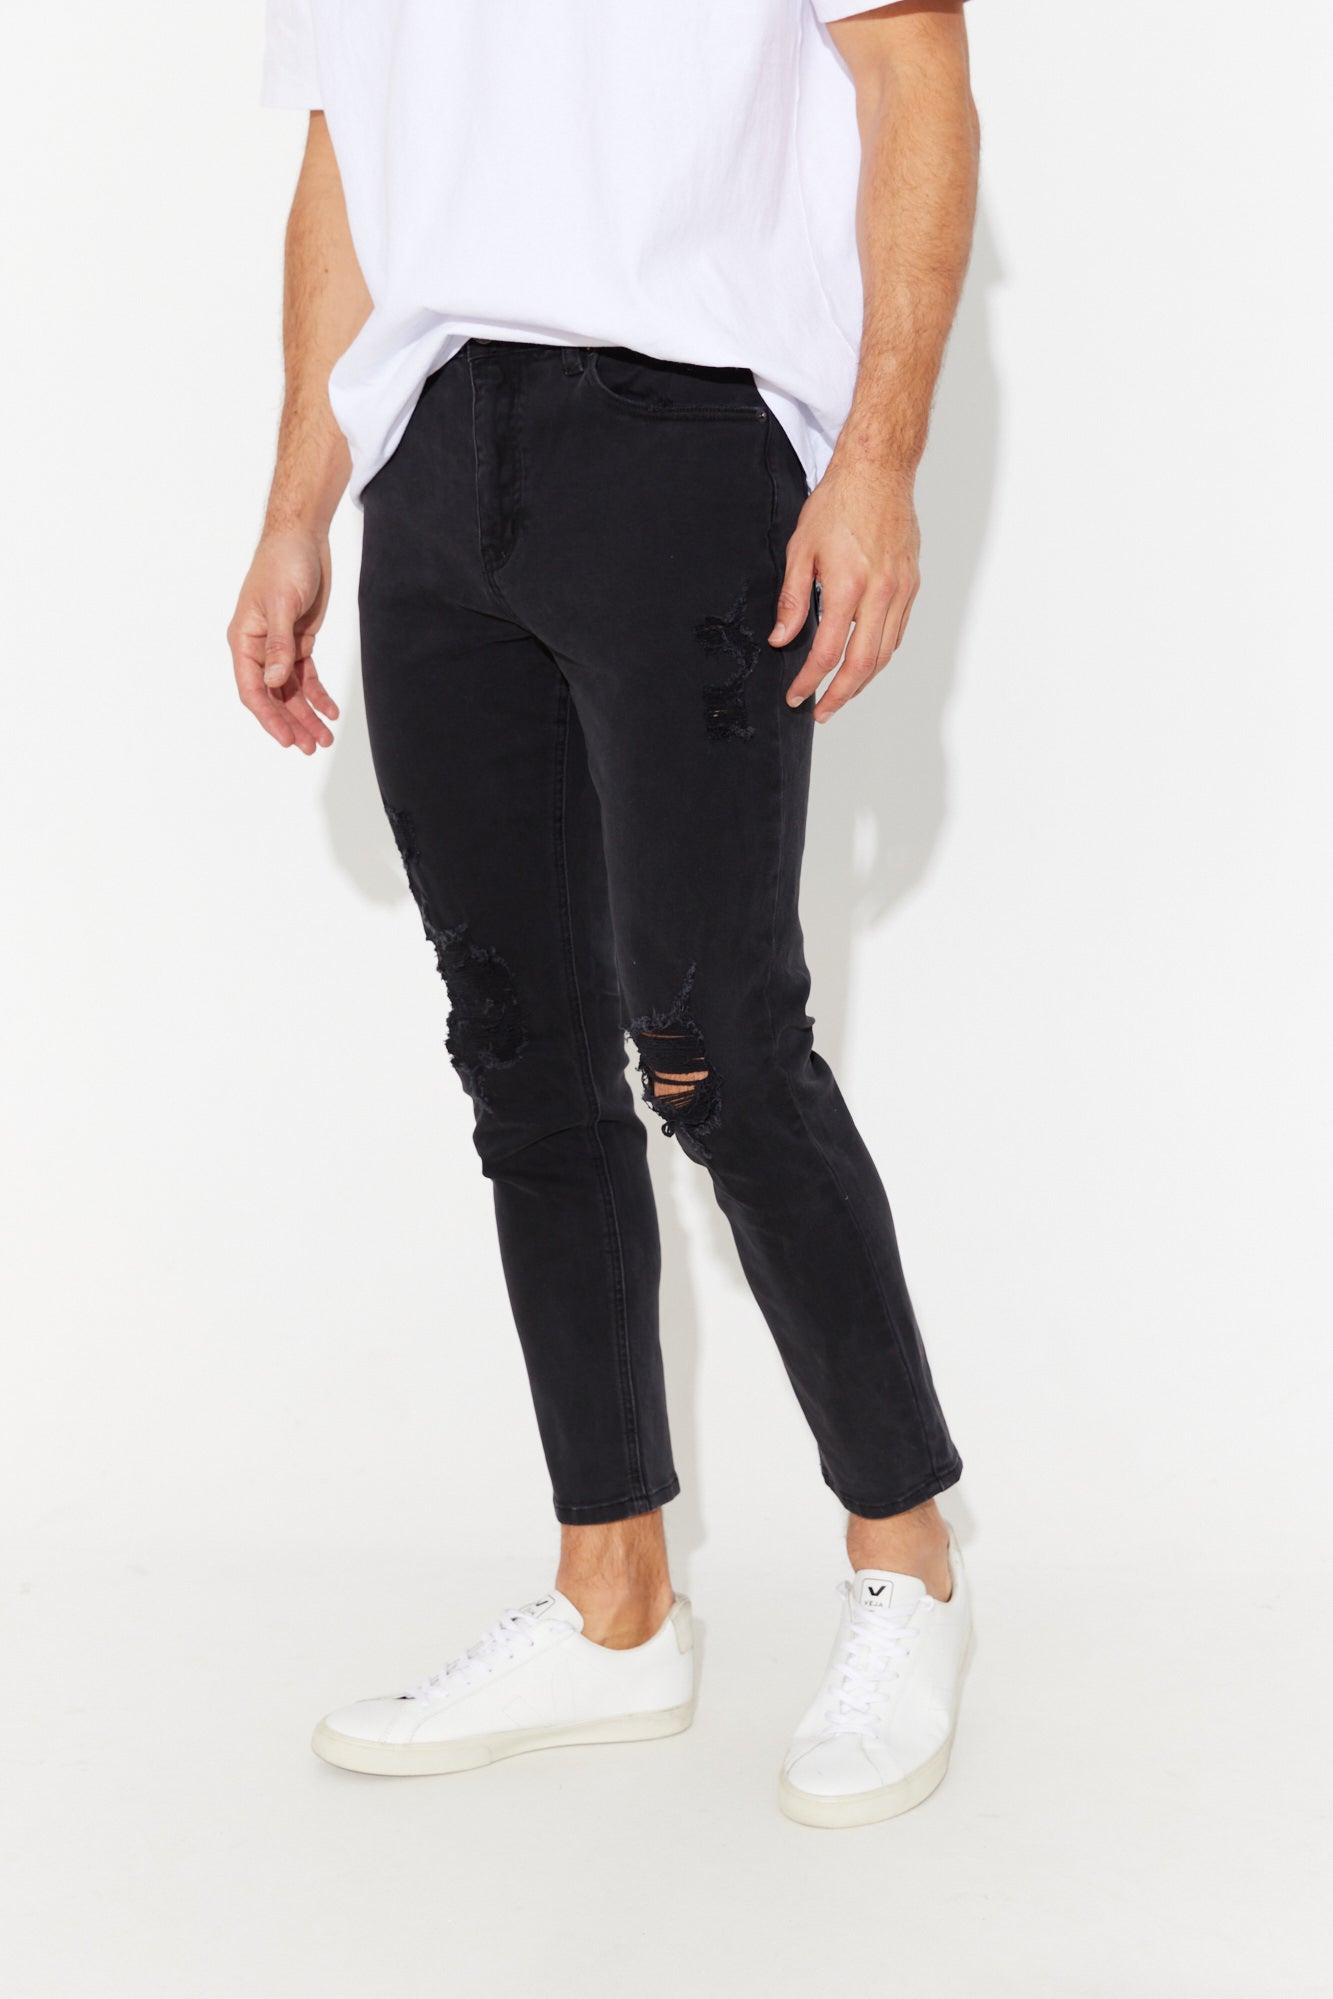 Stretchy Ripped Skinny Black Ripped Biker Jeans With Embroidered Print And  Scratched Finish For Men Slim Fit Denim From Zlzol, $30.29 | DHgate.Com